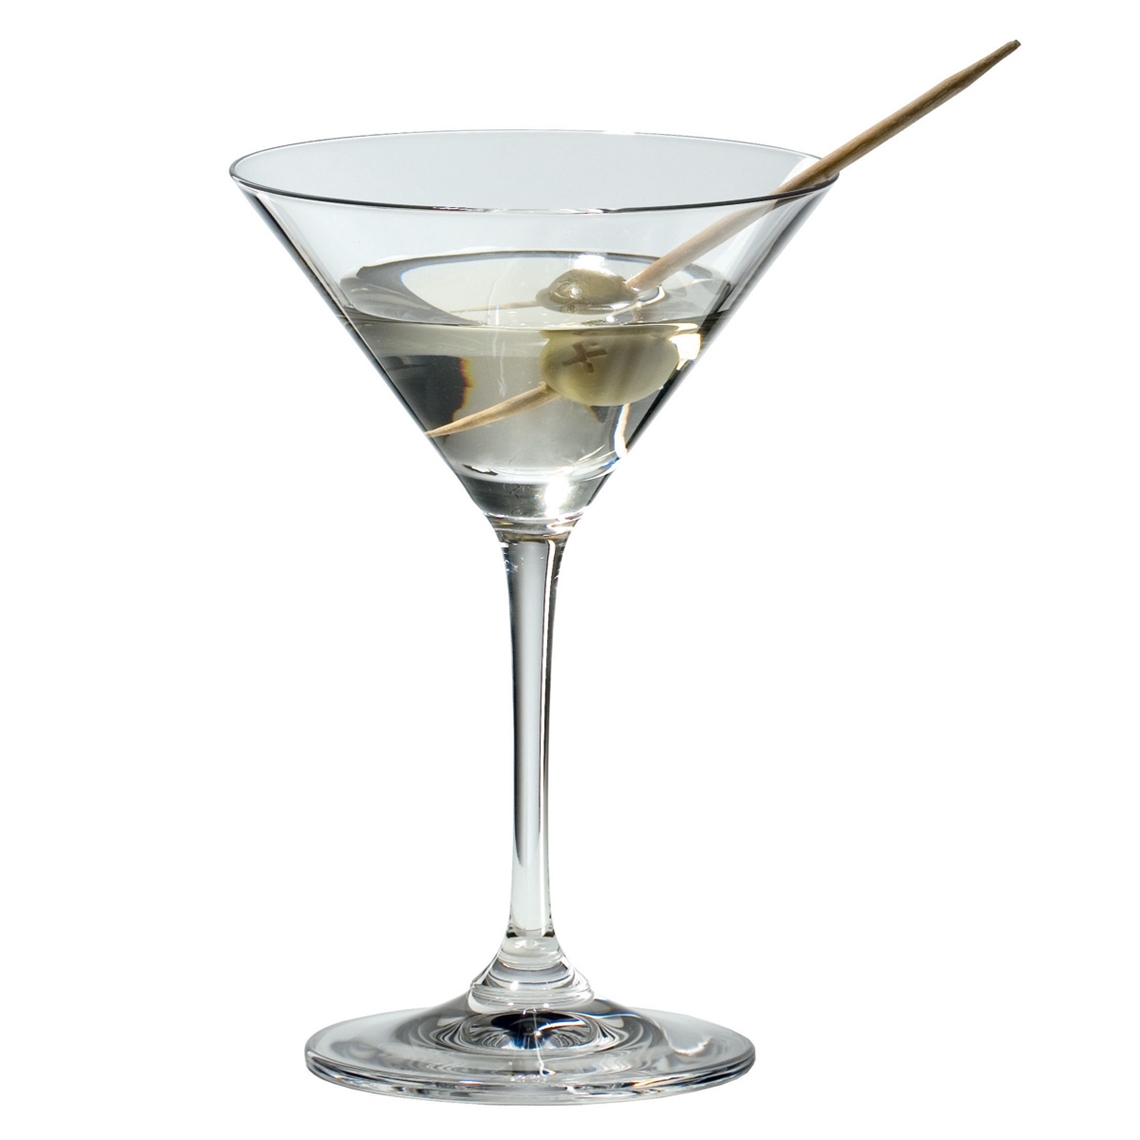 View more wine glasses by region and grape from our Martini Glasses range